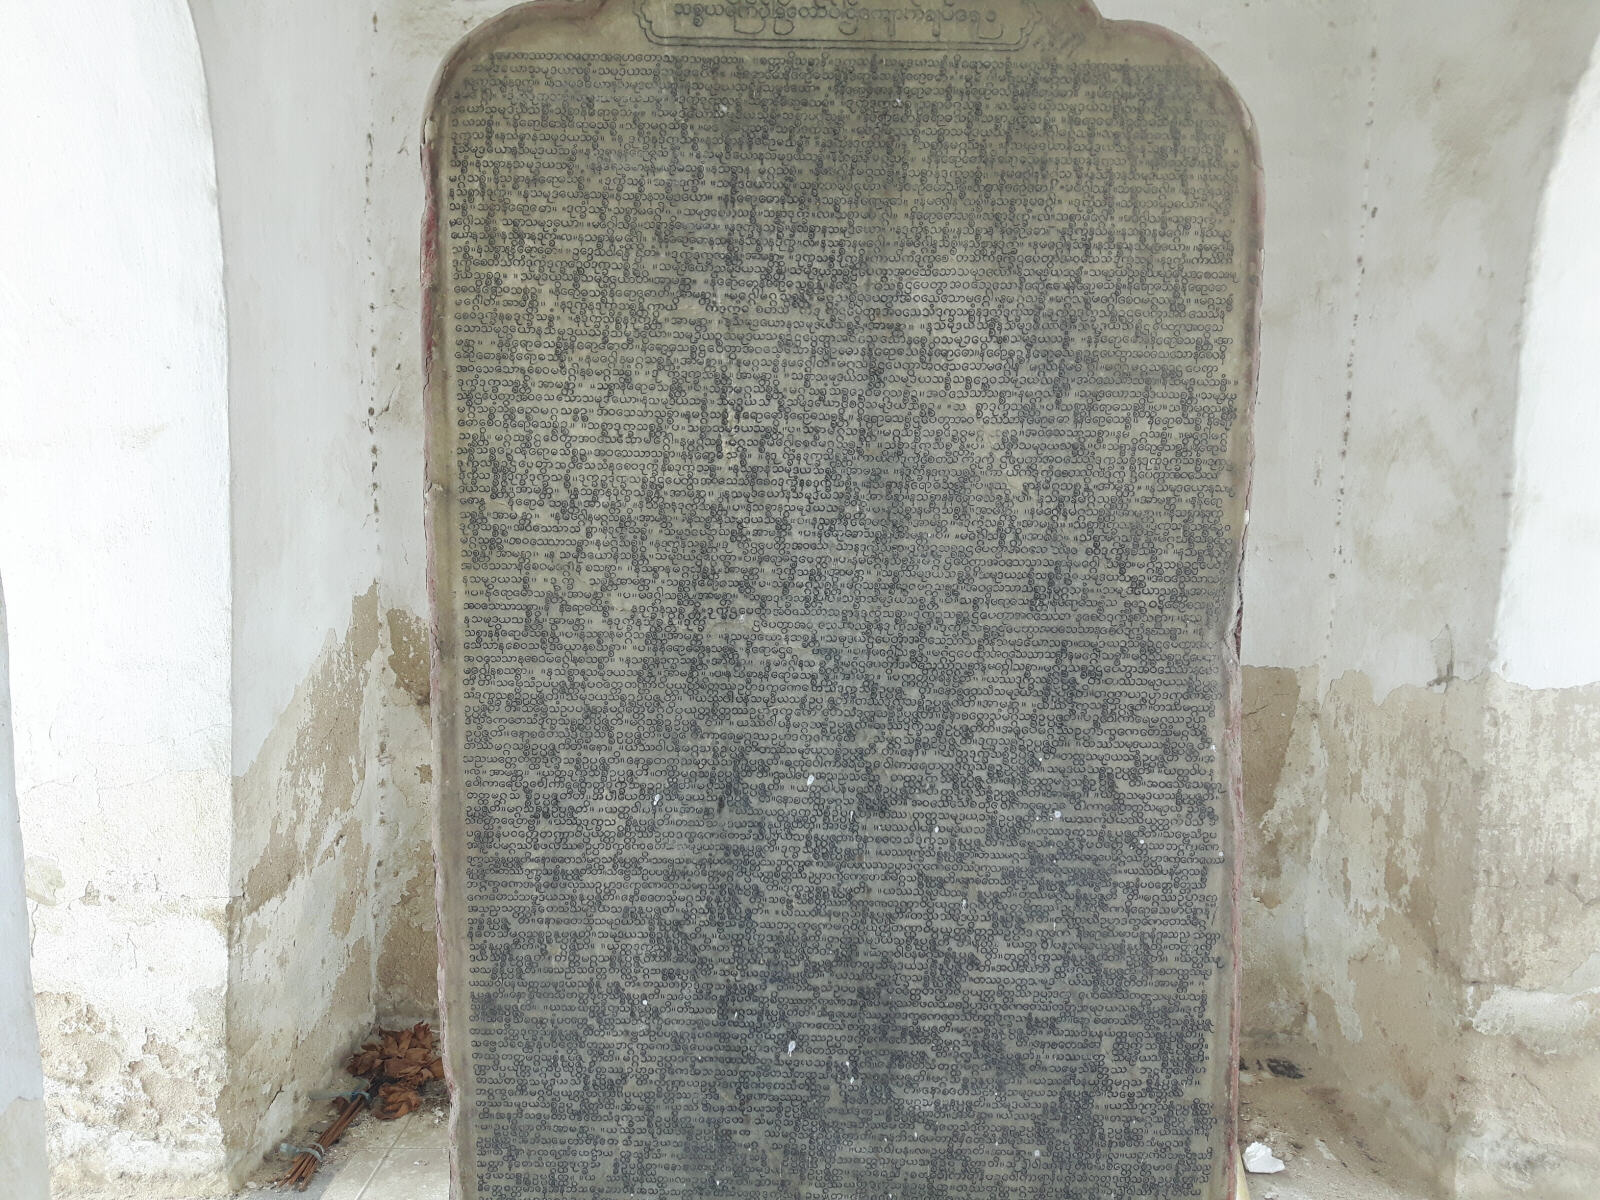 A page of the great stone book at a pagoda in Mandalay